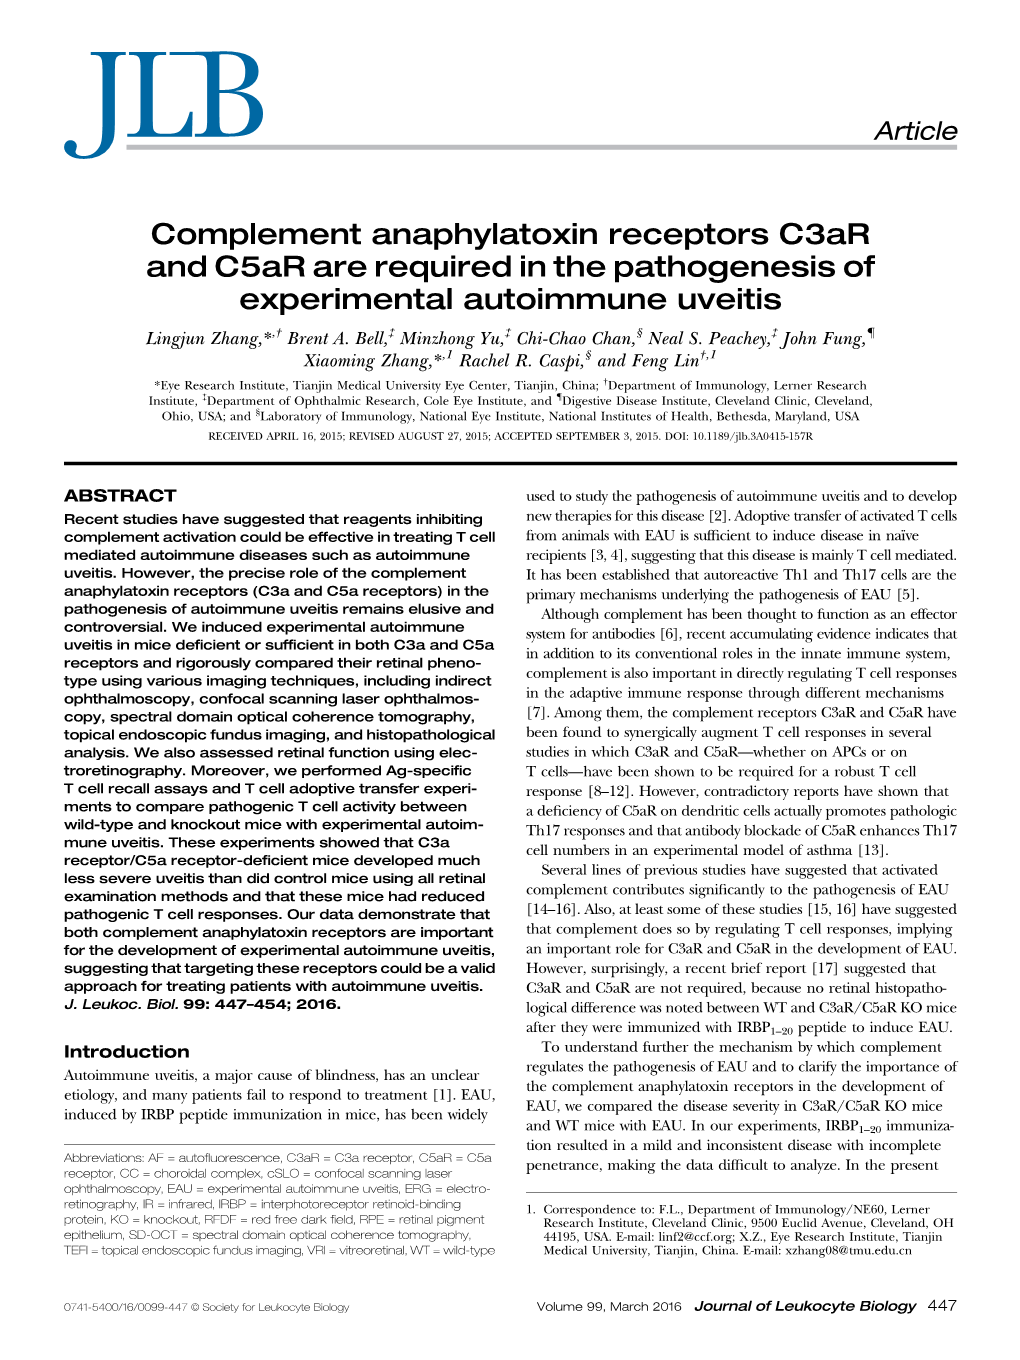 Complement Anaphylatoxin Receptors C3ar and C5ar Are Required in the Pathogenesis of Experimental Autoimmune Uveitis † ‡ ‡ ‡ { Lingjun Zhang,*, Brent A